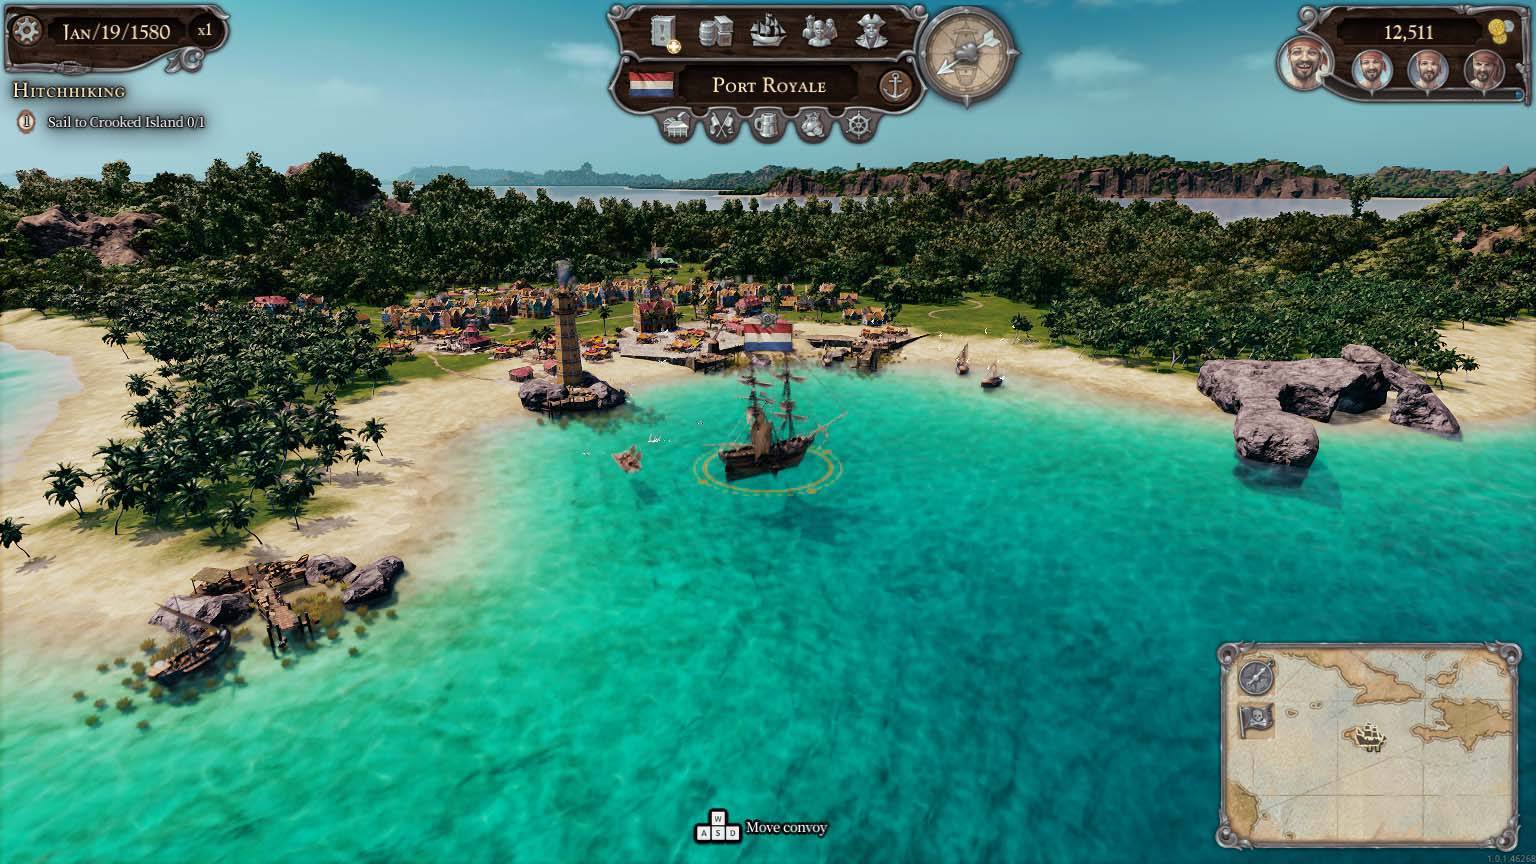 Tortuga - A Pirate's Tale, PC, Review, Gameplay, Screenshots, Pirate RPG Games, NoobFeed